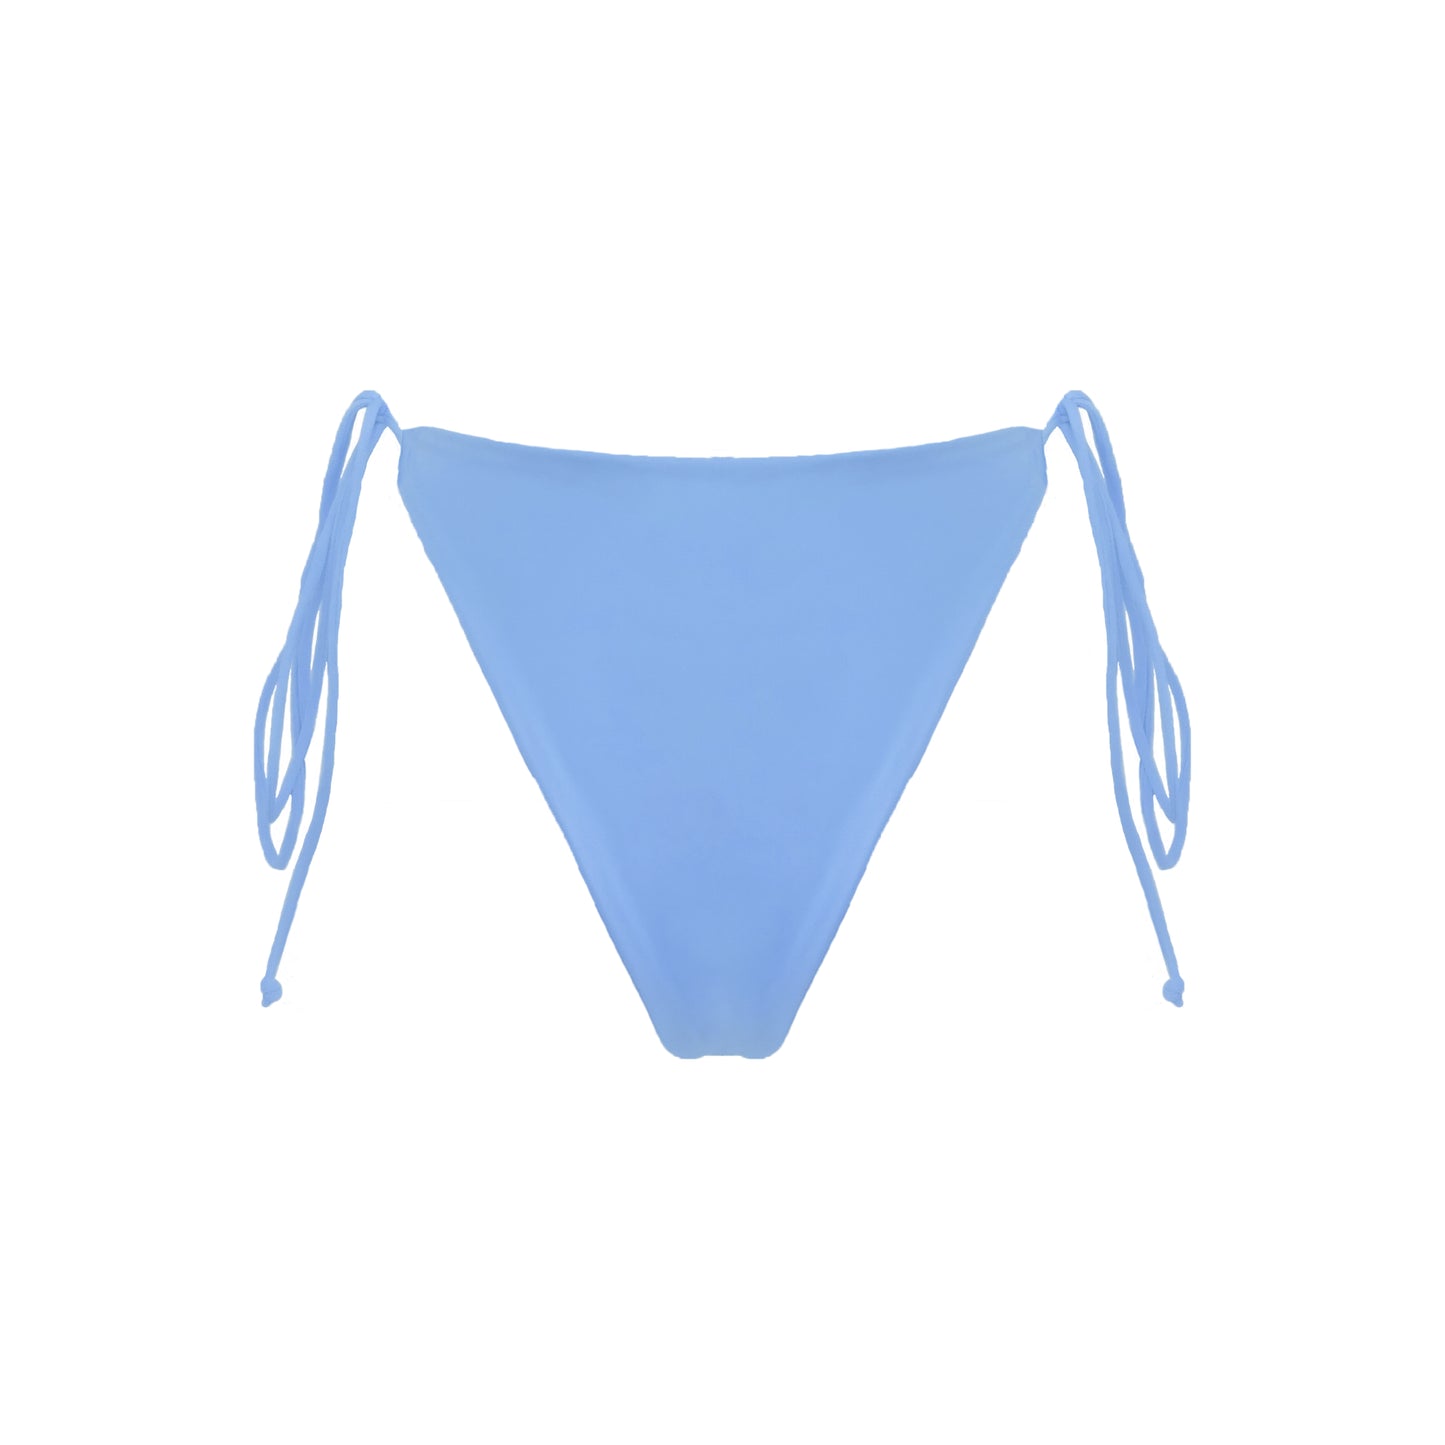 Back view of periwinkle blue Ravello bikini bottom with adjustable side tie straps and cheeky bum coverage.